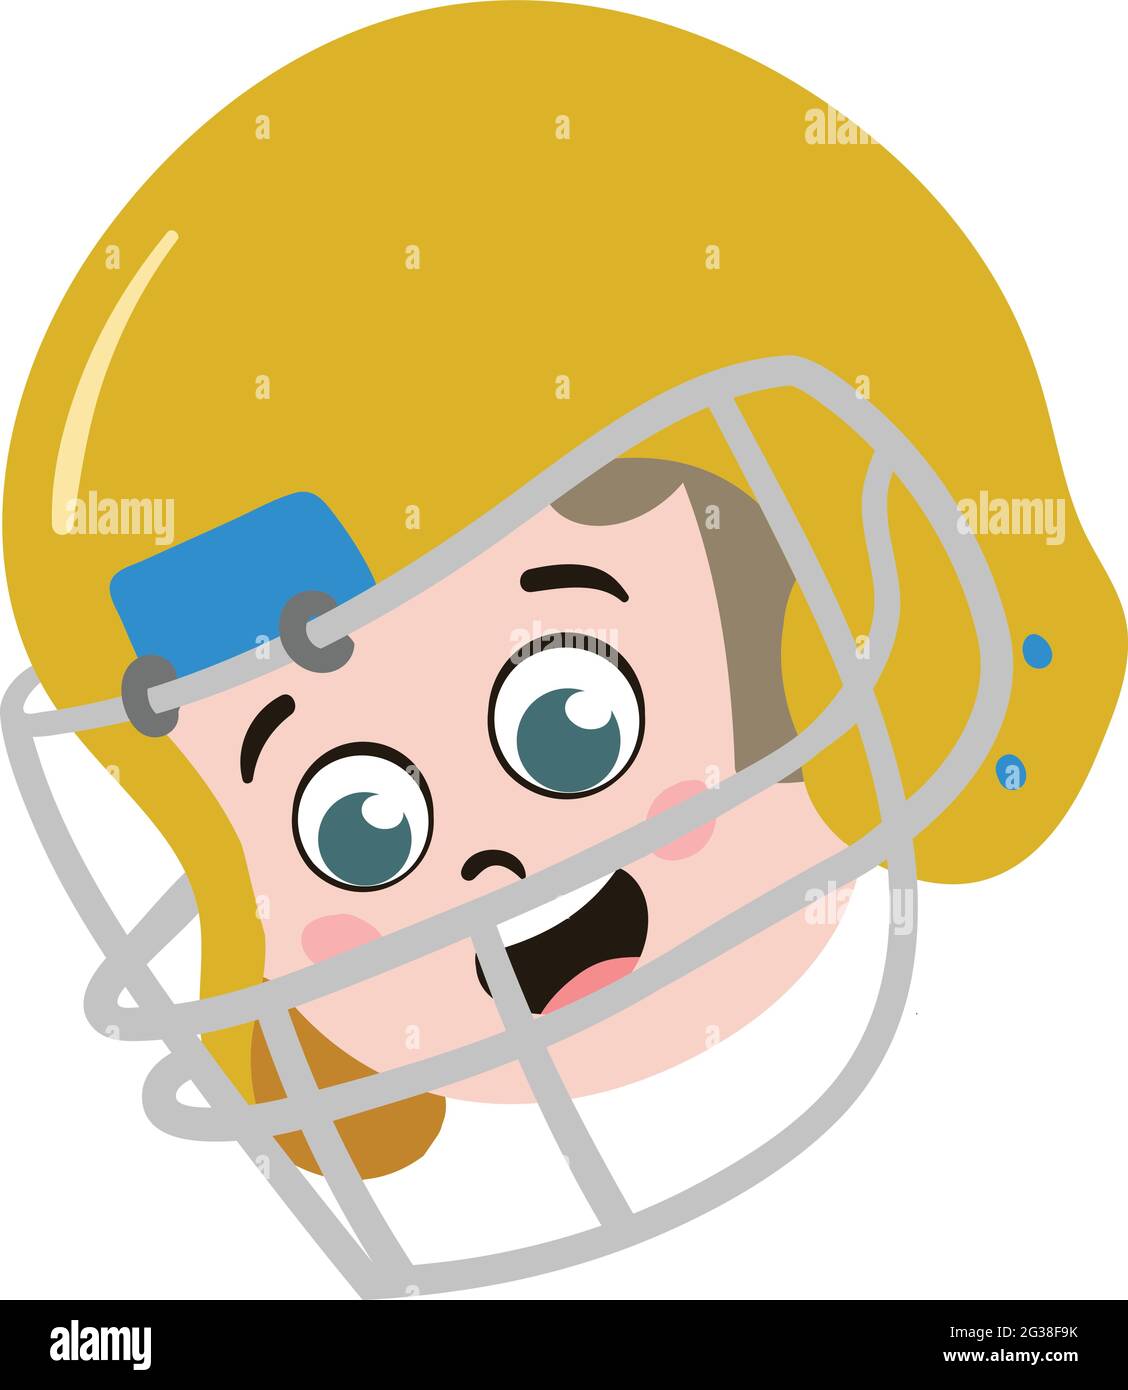 Cute kid Face. Cute and Adorable Rugby Player with Yellow Helmet. Cute Face with Innocent Expressions looking Happy. Smiling Face. Happy Face. Stock Vector